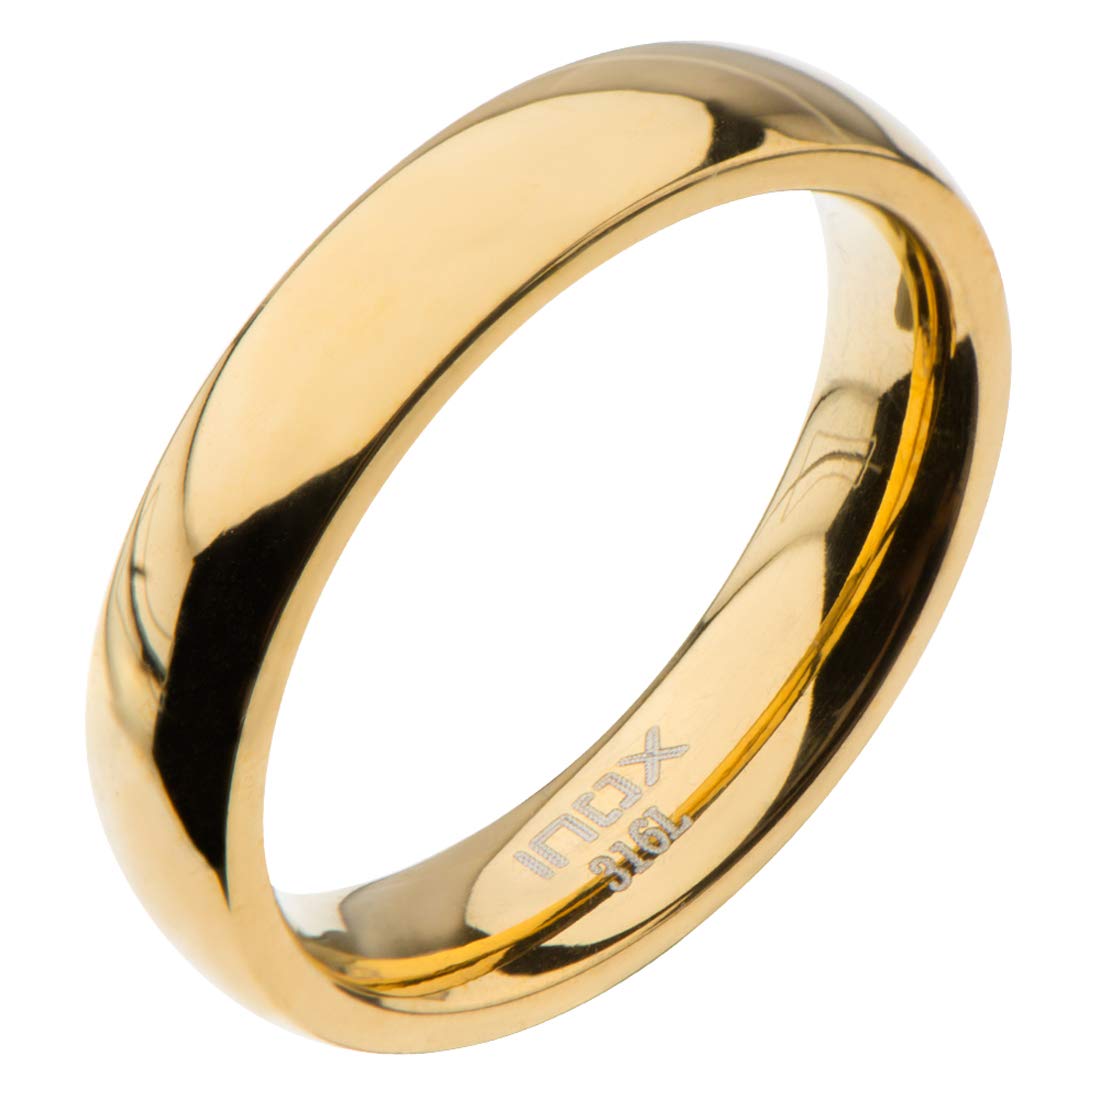 Gold High Polished Ring | Inox | Luby 